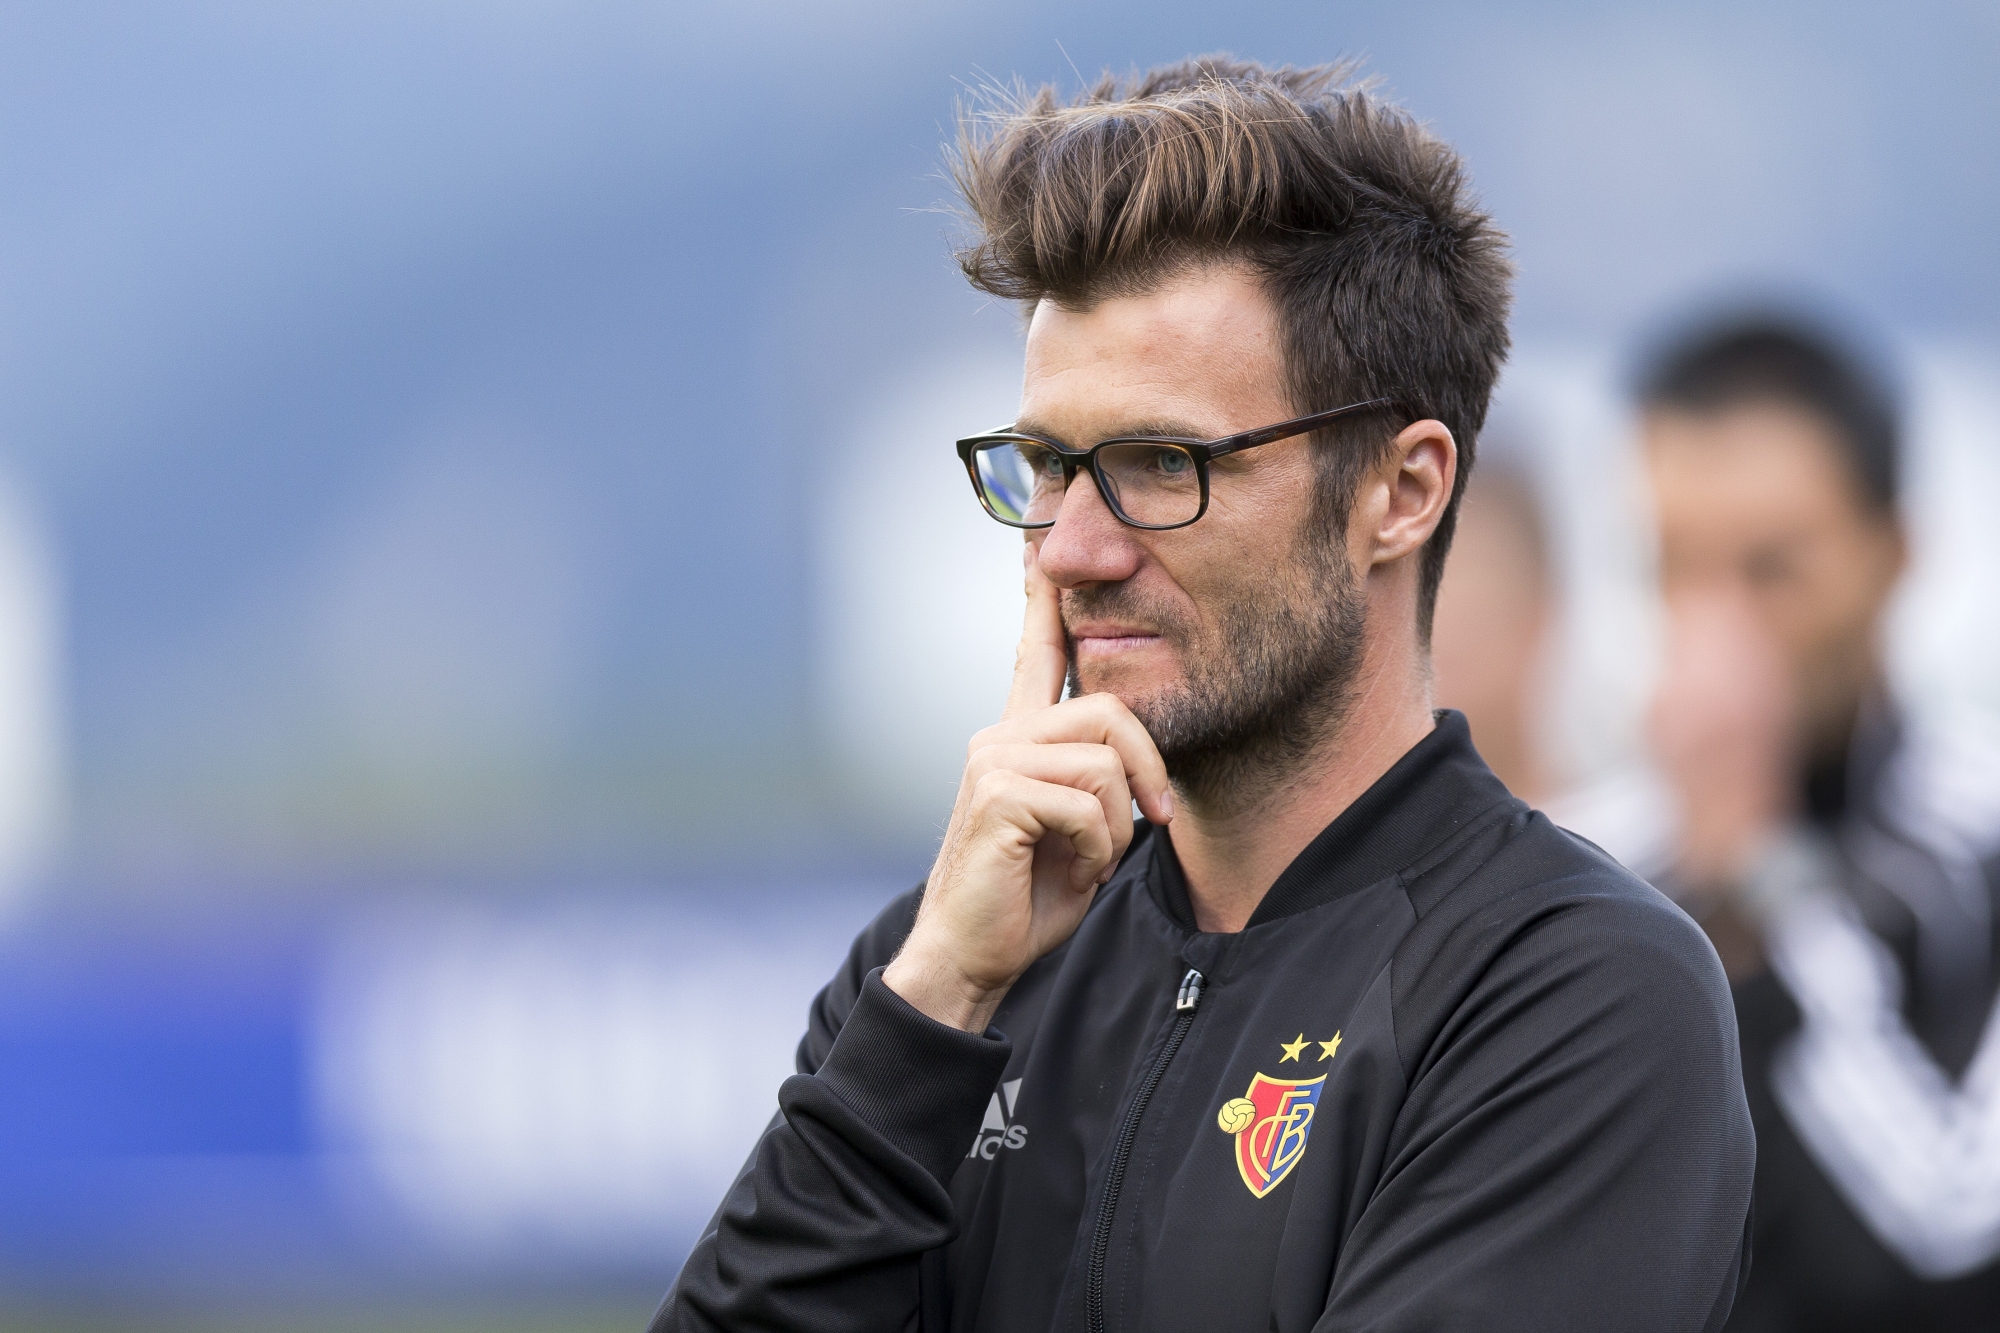 Basel's head coach Raphael Wicky, during a friendly soccer match as part of the Festival de Football des Alpes between FC Basel 1893 from Switzerland and Athletic Club Bilbao from Spain, at the Stade du Christ-Roi, in Lens, Switzerland,  Wednesday, July 12, 2017. (KEYSTONE/Cyril Zingaro) SWITZERLAND SOCCER FC BASEL ATHLETIC CLUB BILBAO